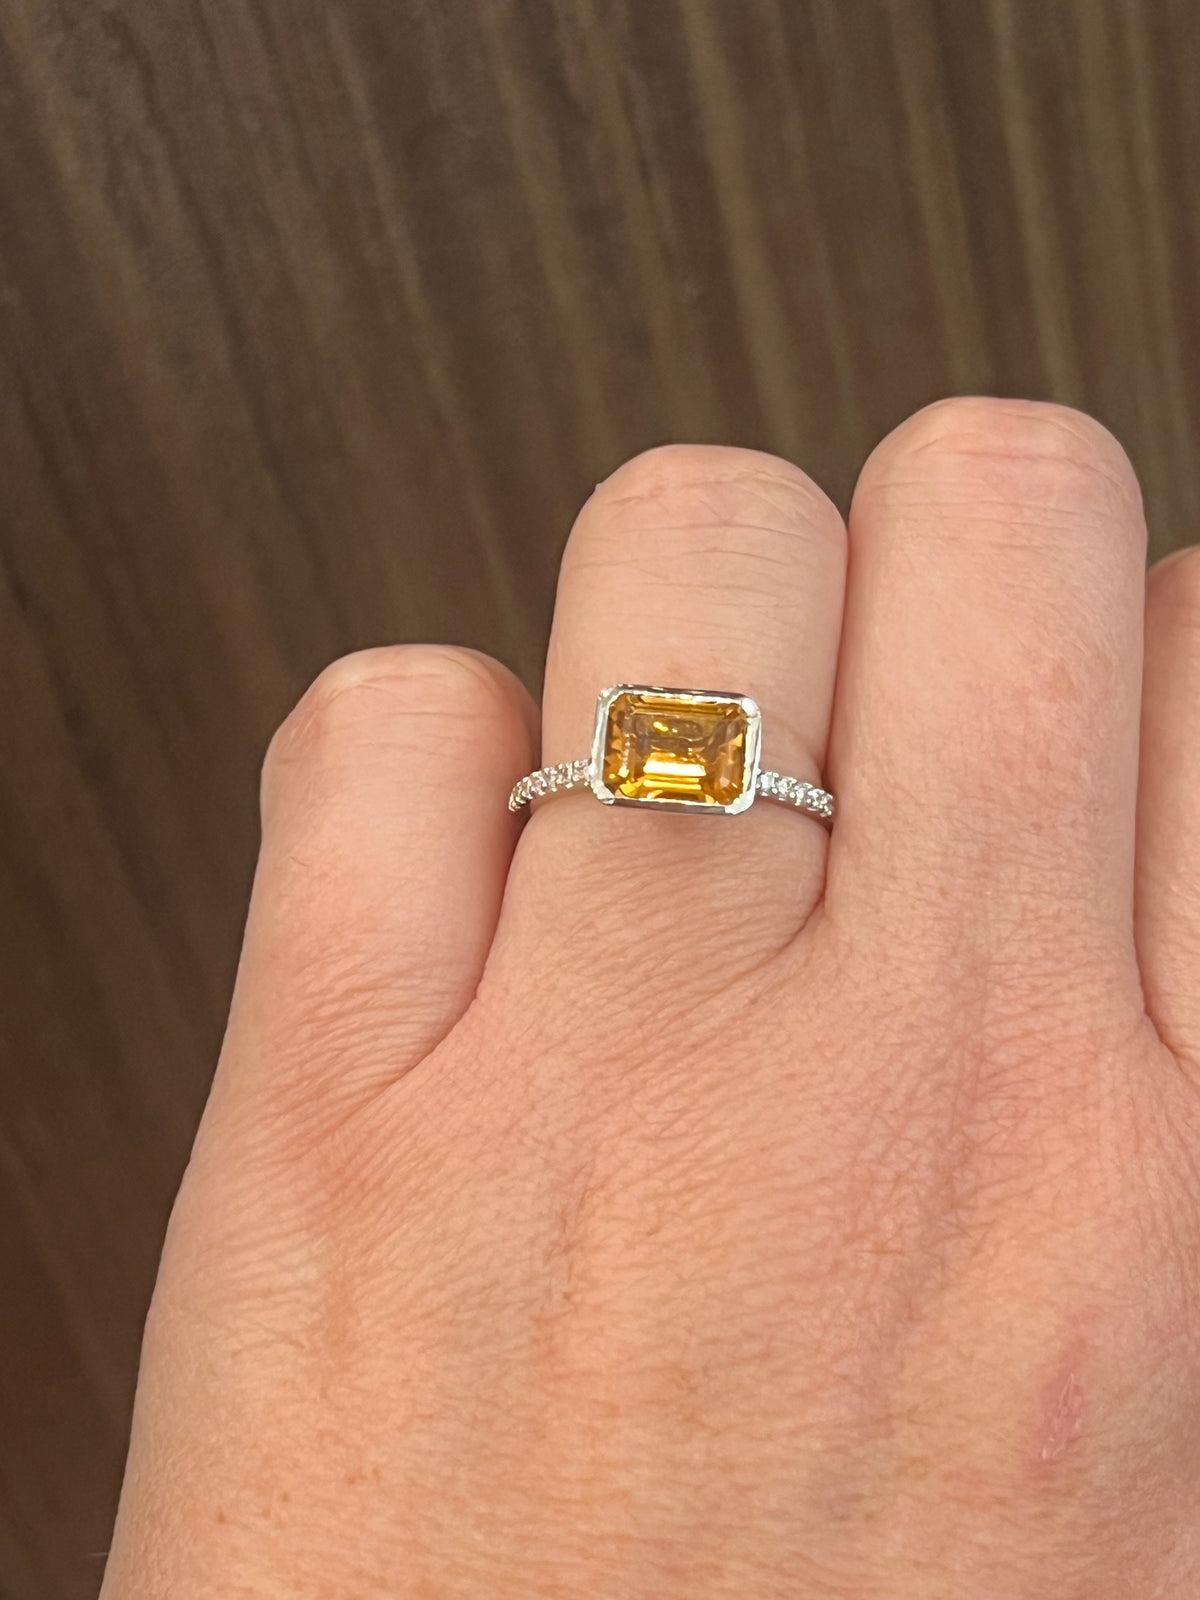 14K White Gold 1.28cttw Citrine and 0.14cttw Diamond Ring - Size 7